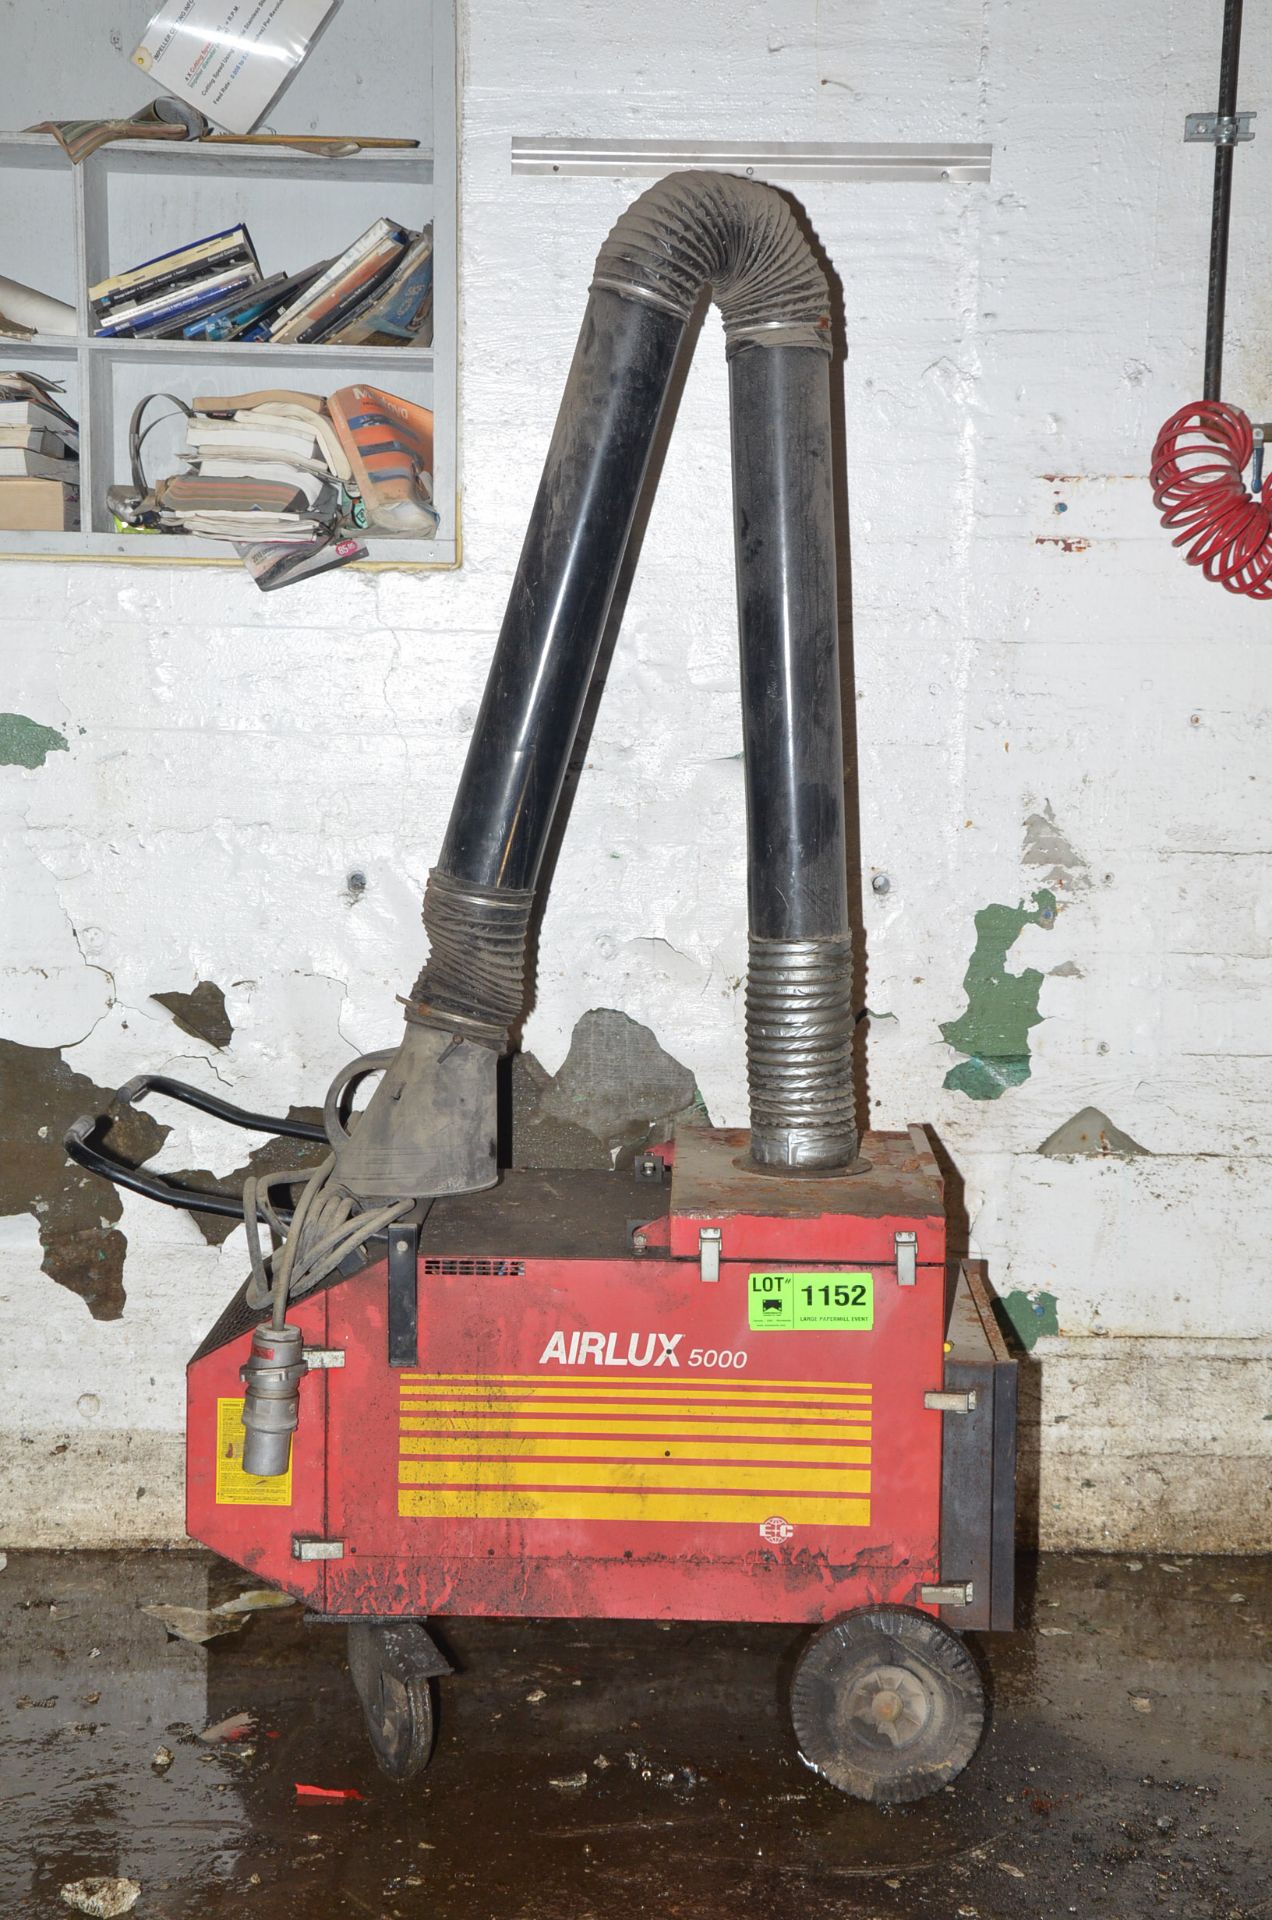 AIRLUX 5000 PORTABLE WELDING FUME EXTRACTOR, S/N N/A [RIGGING FEES FOR LOT #1152 - $60 USD PLUS